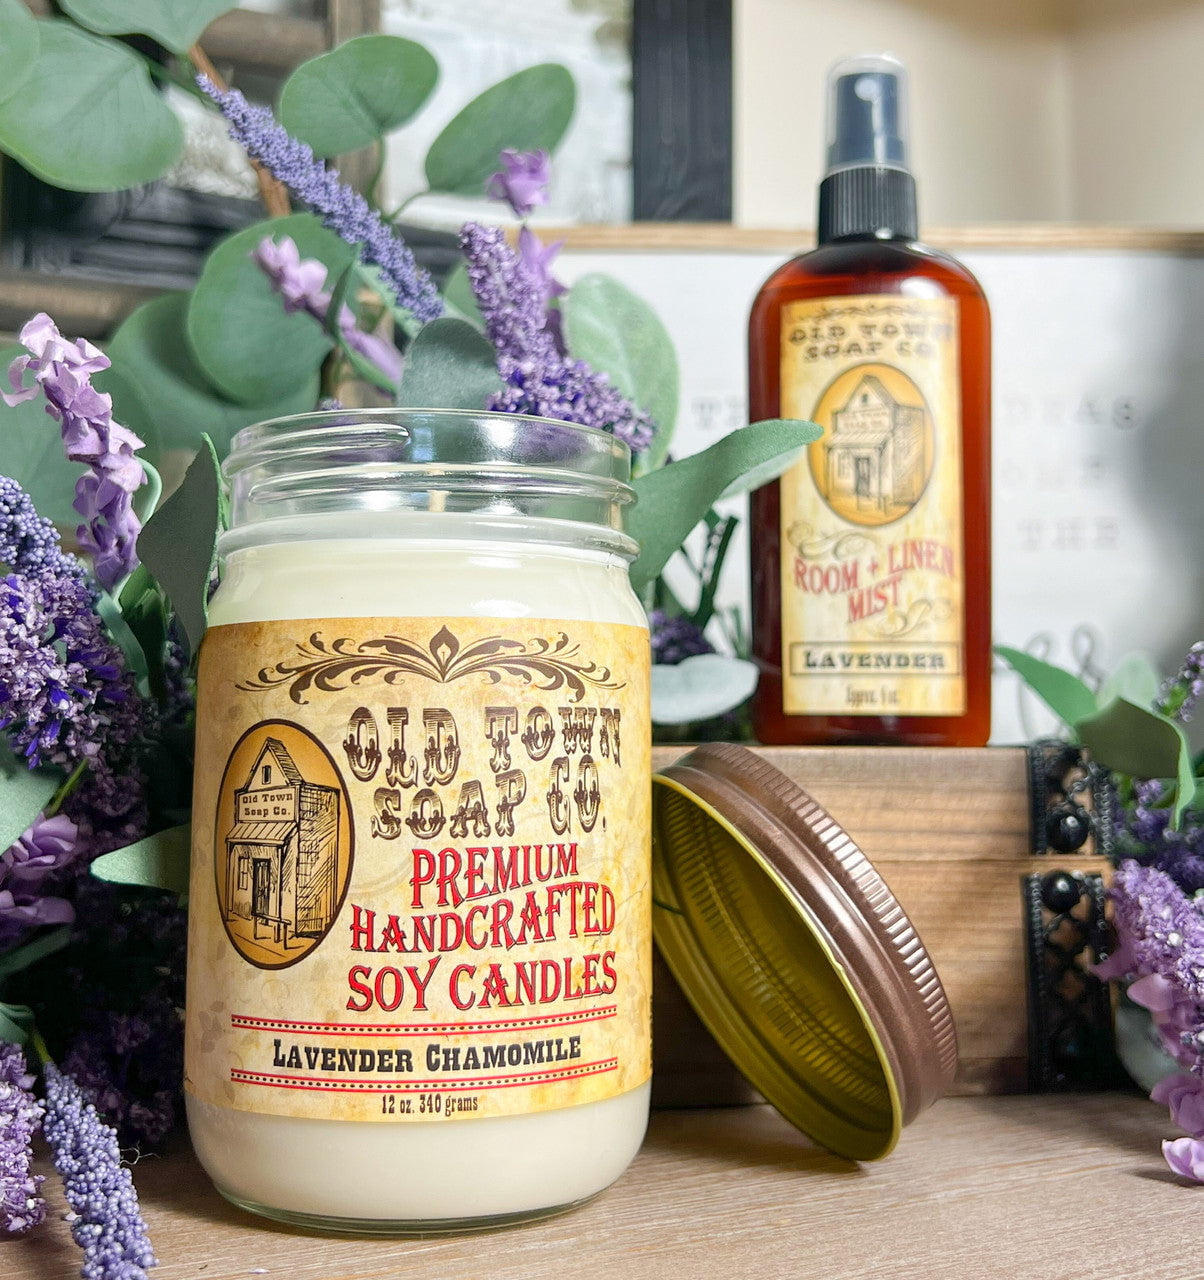 Blueberry Muffin - 12oz. Candles - Old Town Soap Co.